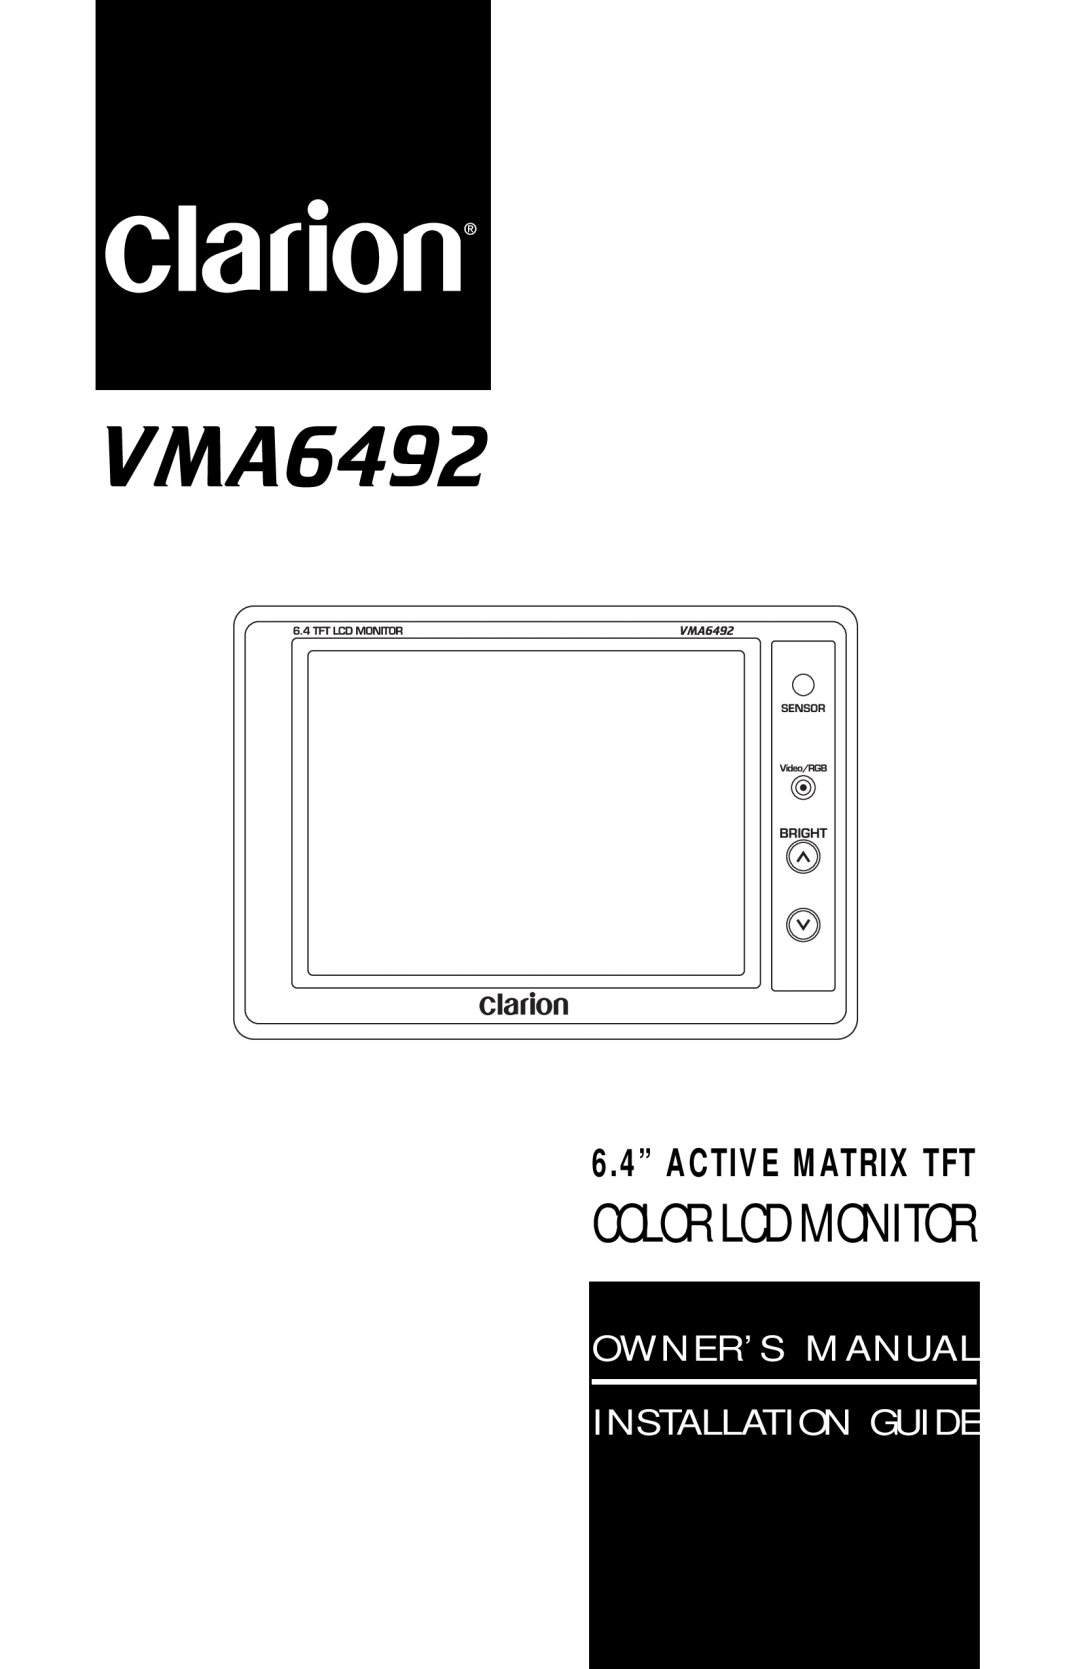 Clarion VMA6492 owner manual Color Lcd Monitor, O W N E R ’ S M A N U A L Installation Guide, 6.4” ACTIVE MATRIX TFT 